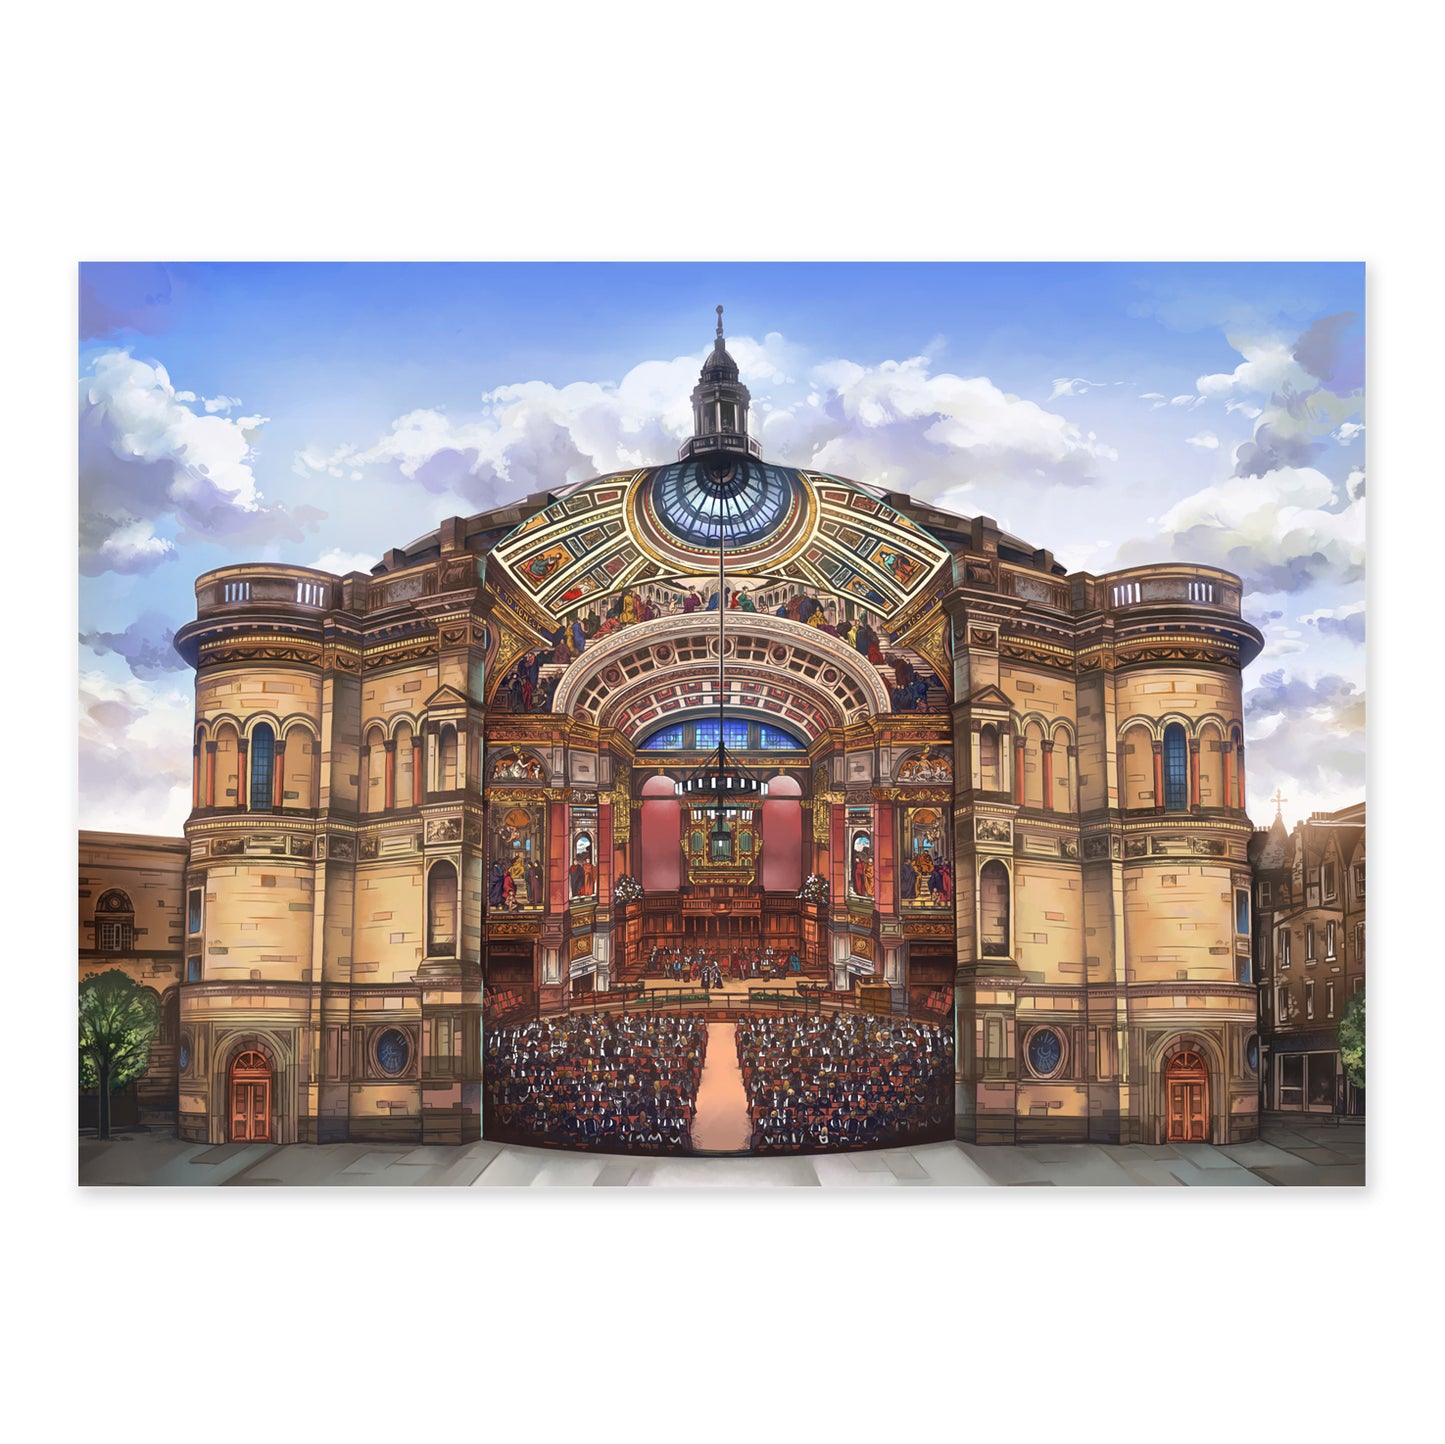 Art Print of McEwan Hall. Design shows the outside of the building, and in the centre the design shows a presentation of the inside.